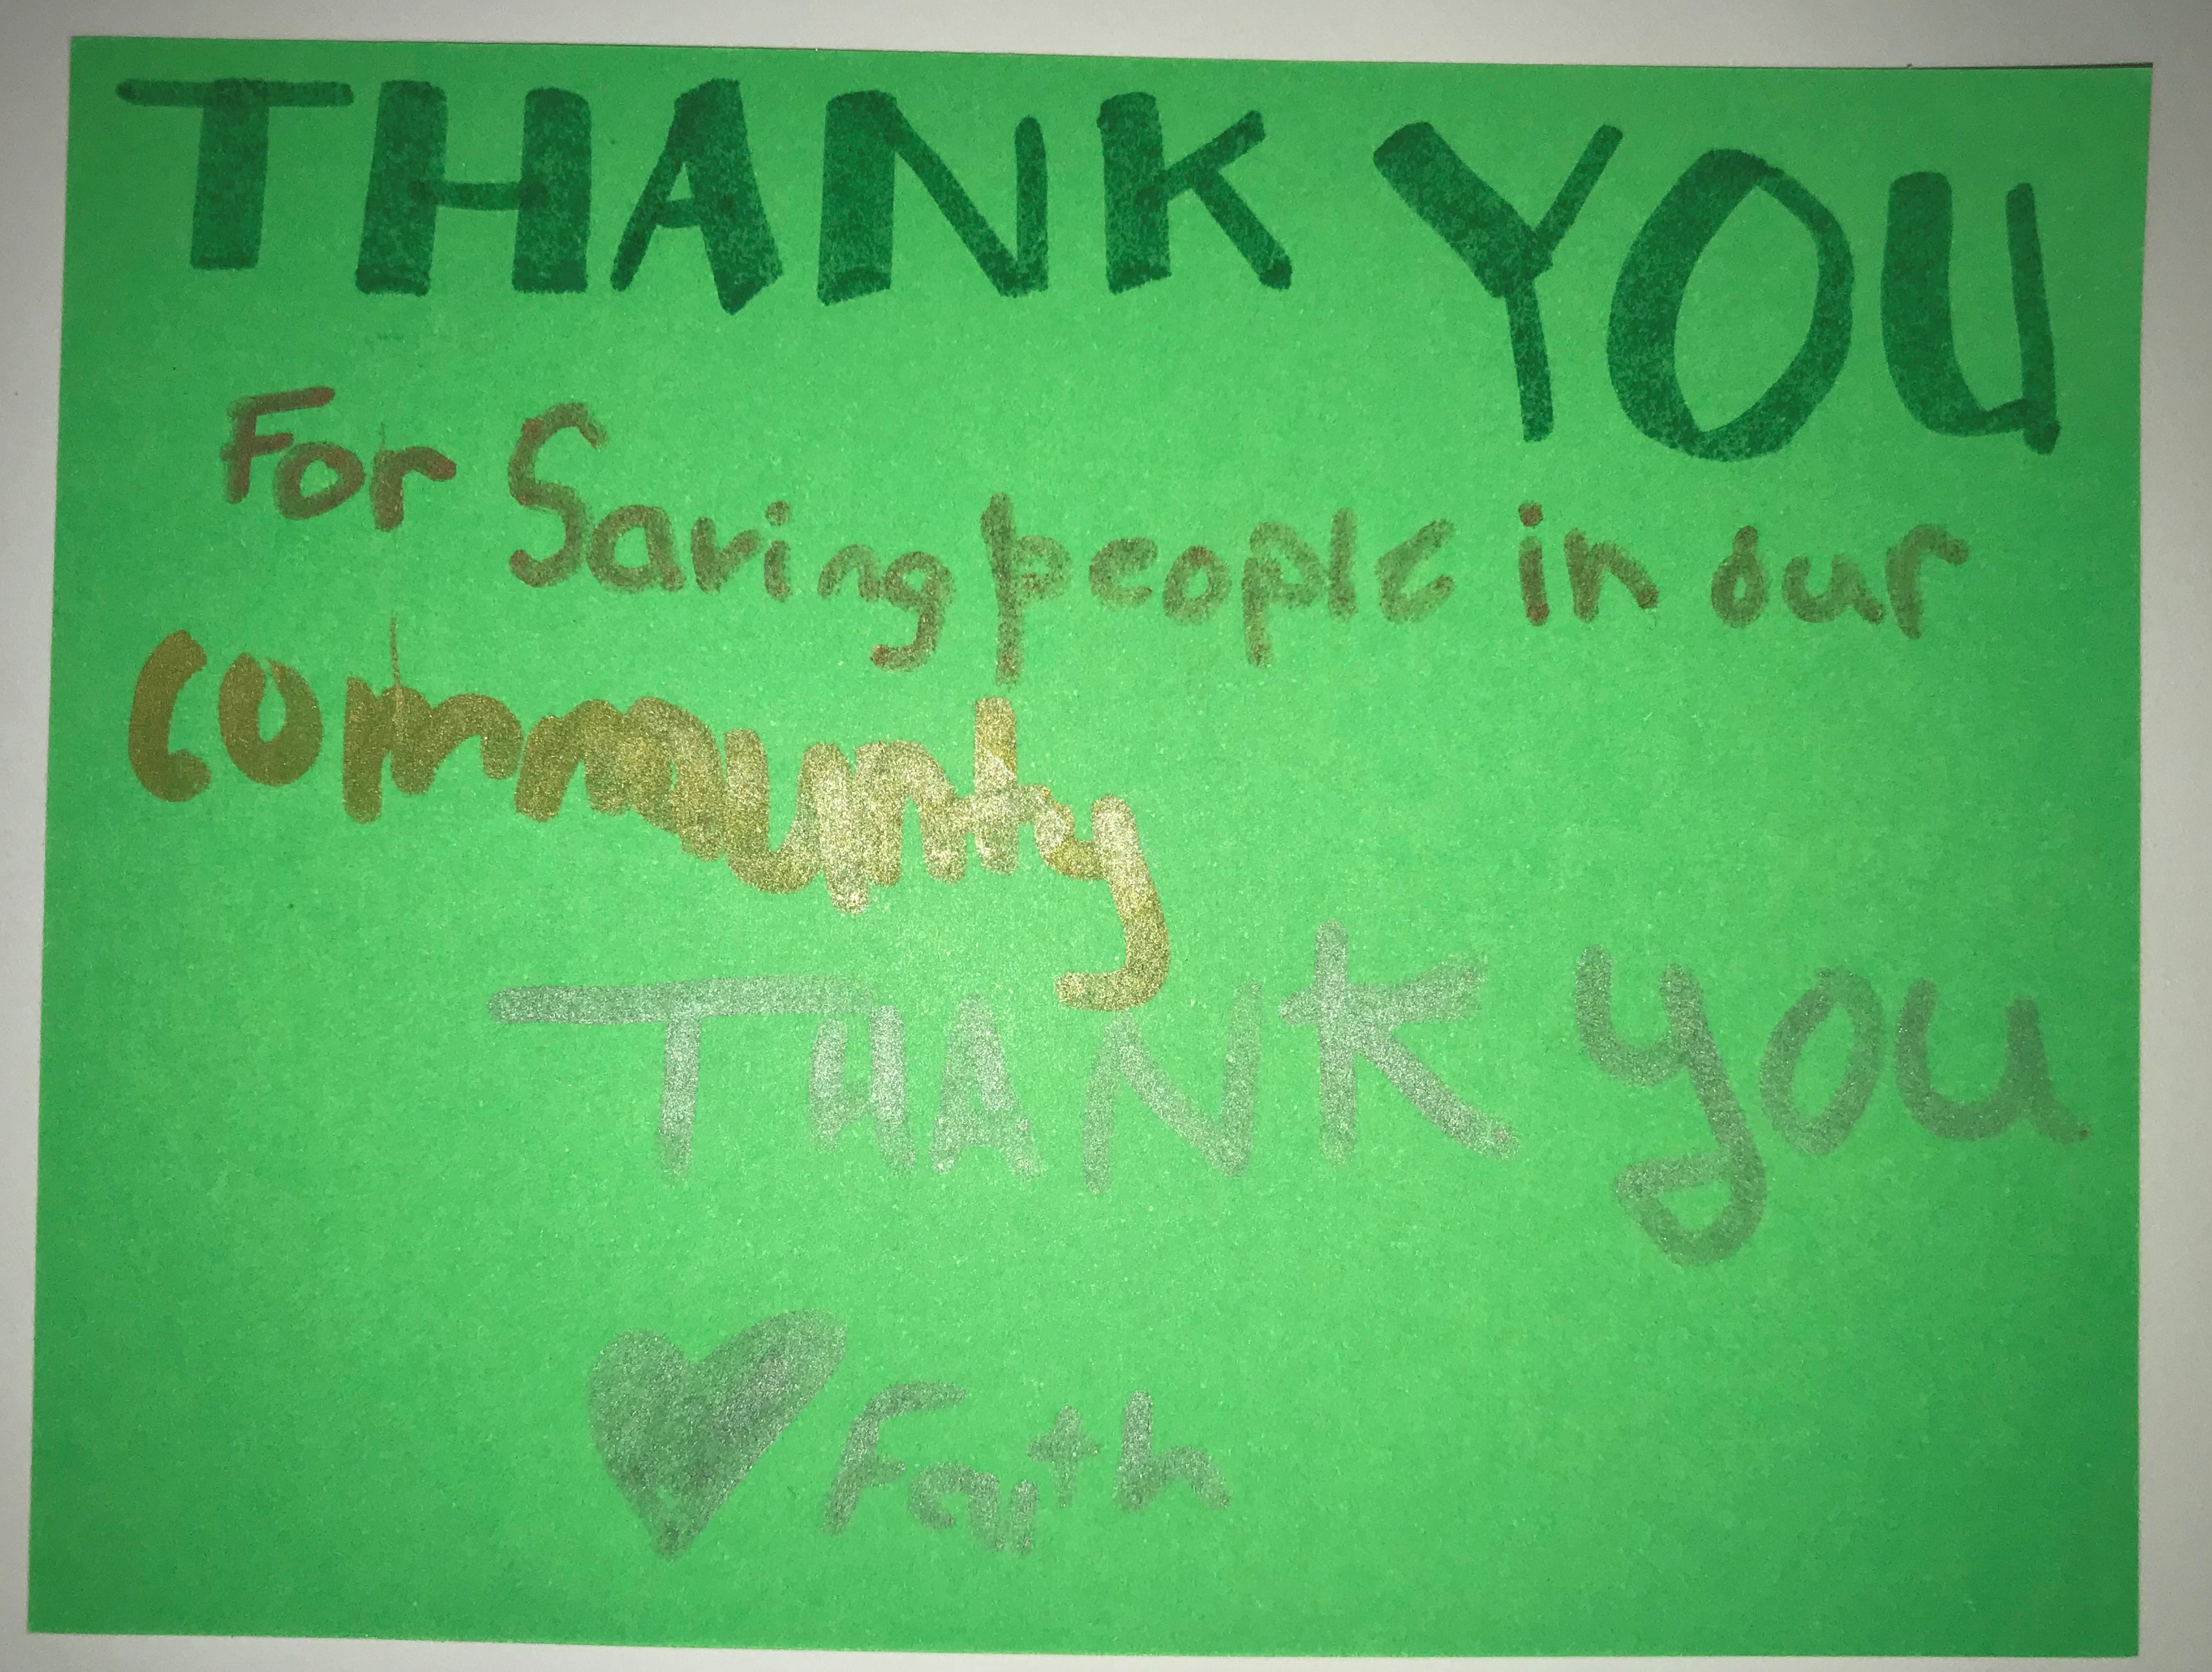 Thank you for saving people in our community.